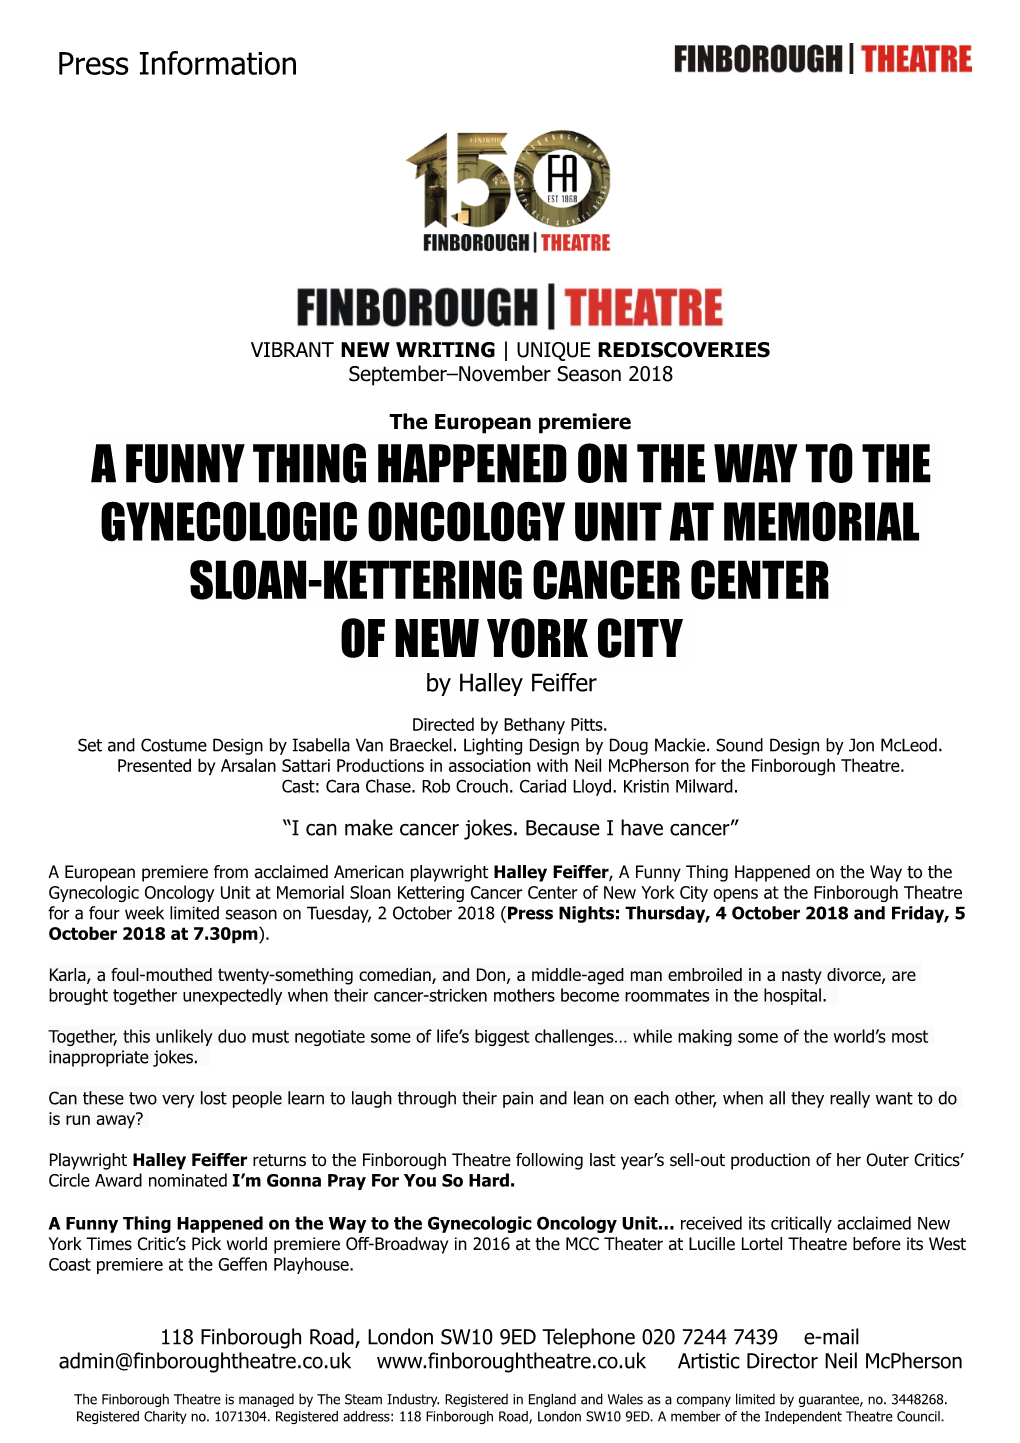 A FUNNY THING HAPPENED on the WAY to the GYNECOLOGIC ONCOLOGY UNIT at MEMORIAL SLOAN-KETTERING CANCER CENTER of NEW YORK CITY by Halley Feiffer